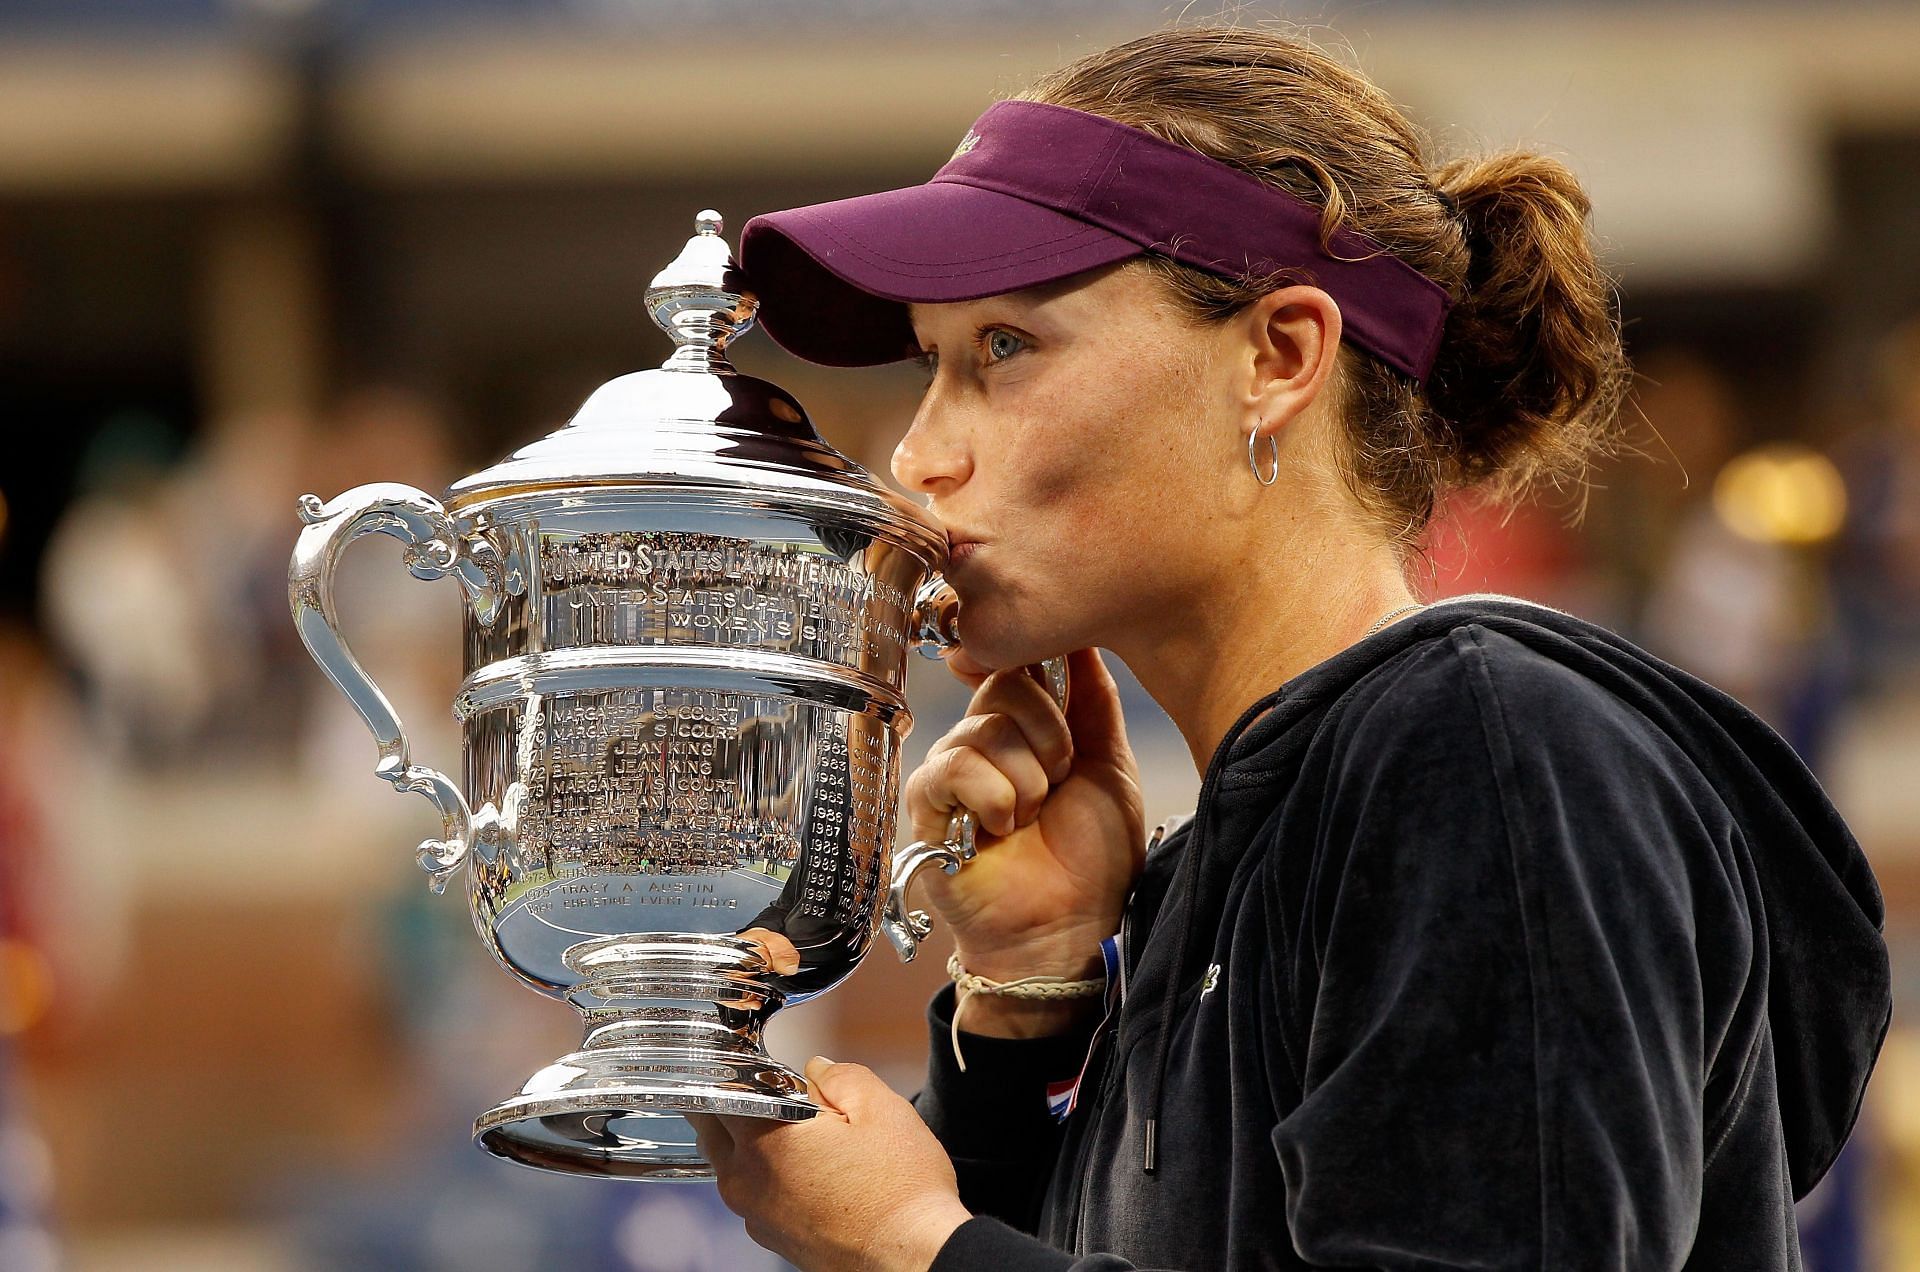 Sam Stosur poses with the 2011 US Open trophy